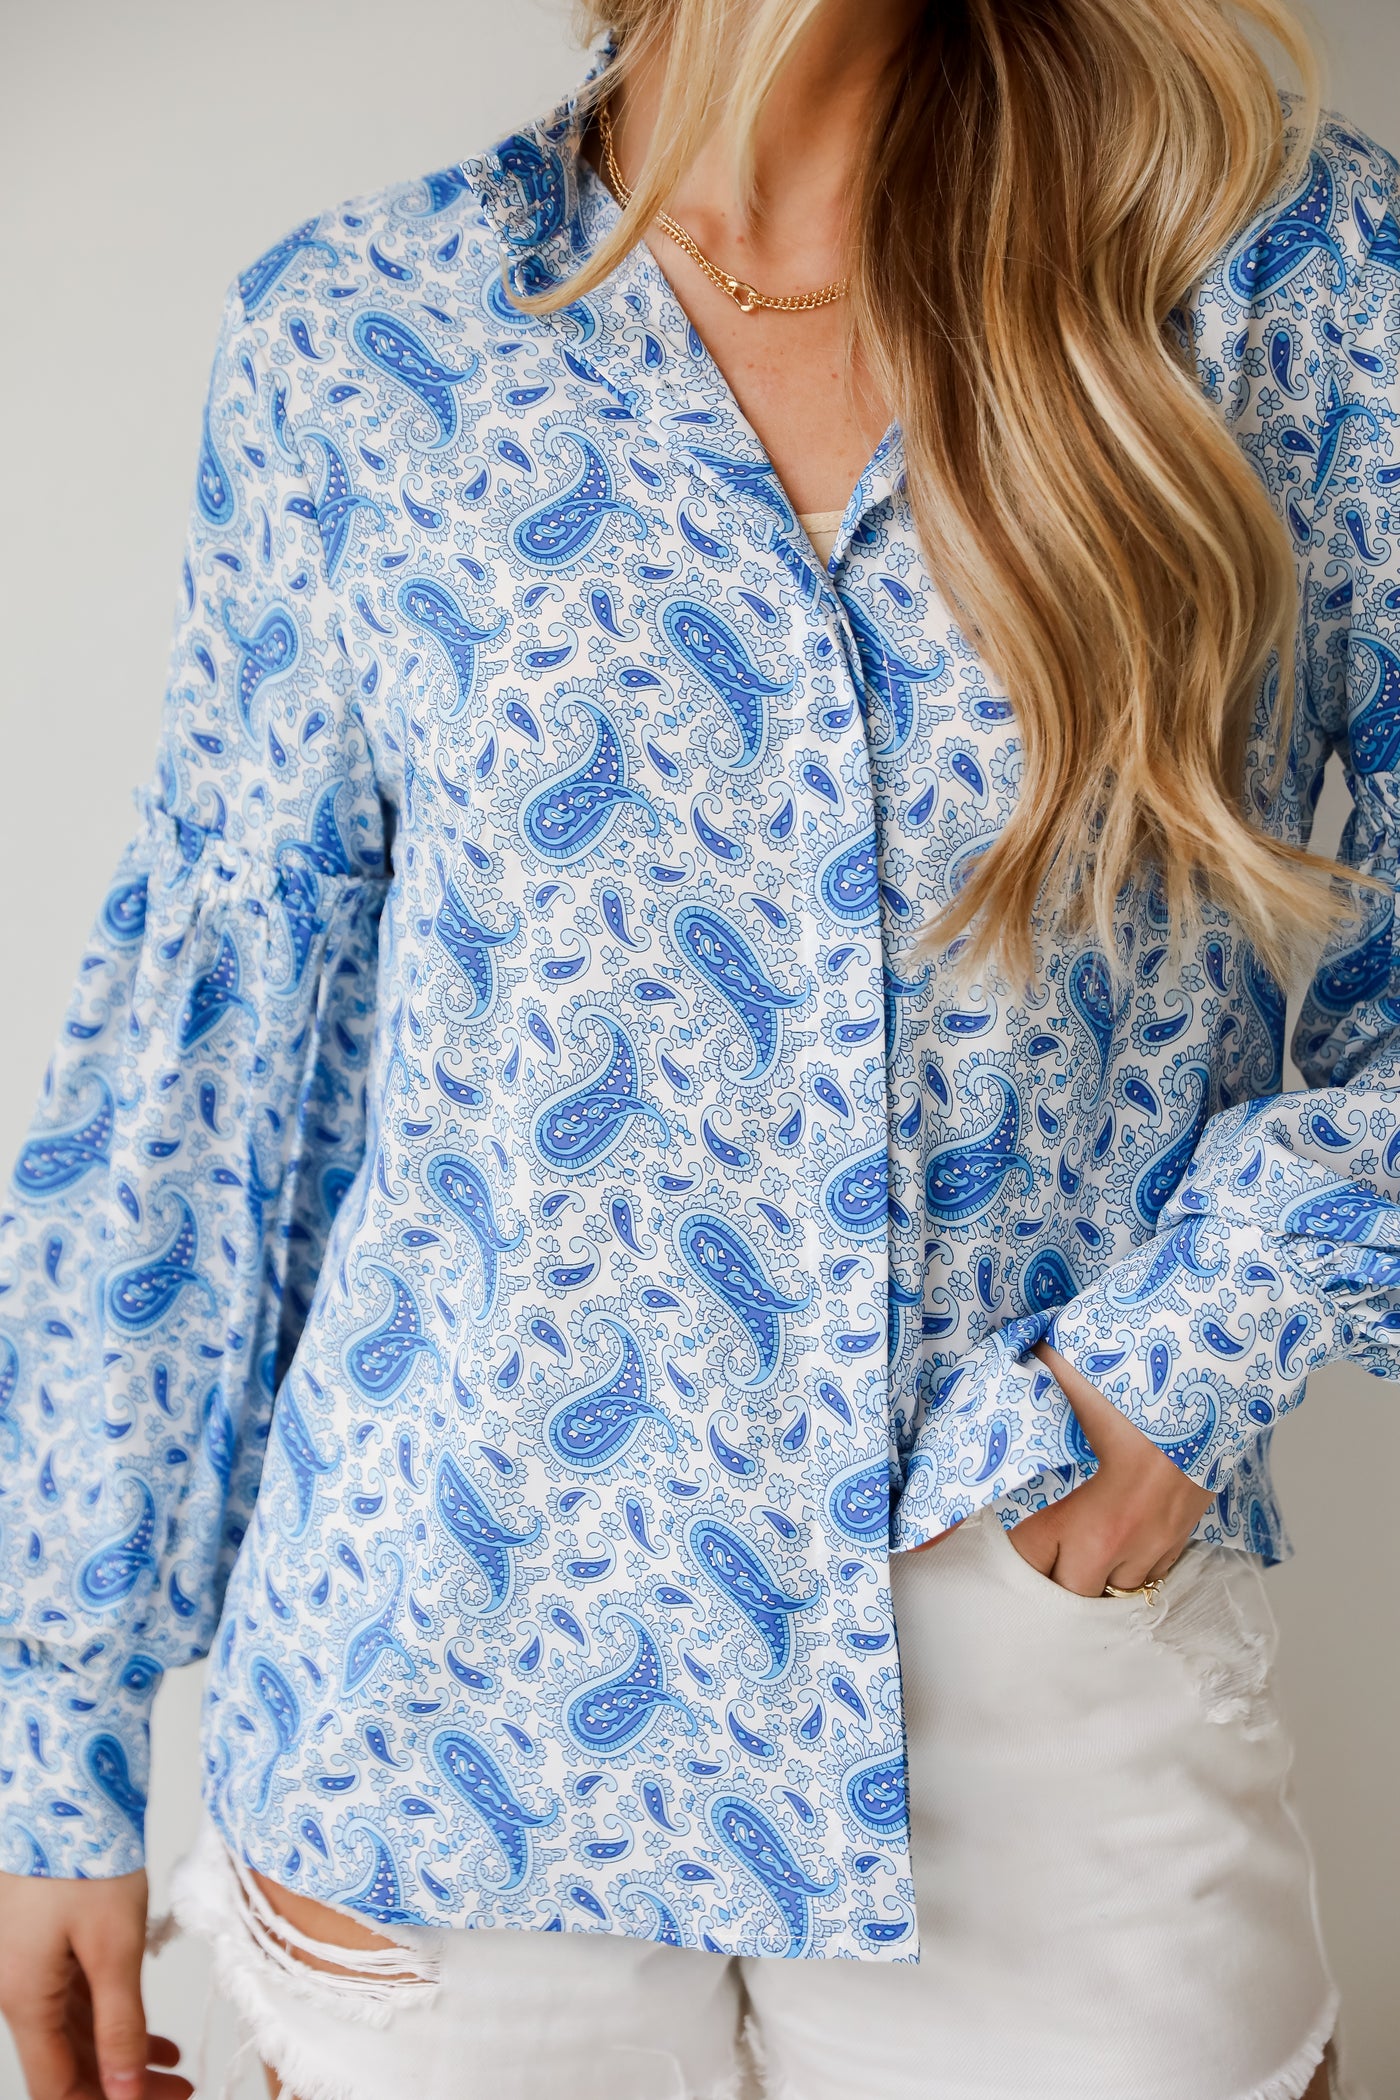 cute blouses, Blue Paisley Blouse, Truly Delightful Blue Paisley Blouse, Blue Paisley Top, Women's Top, Tops For Work